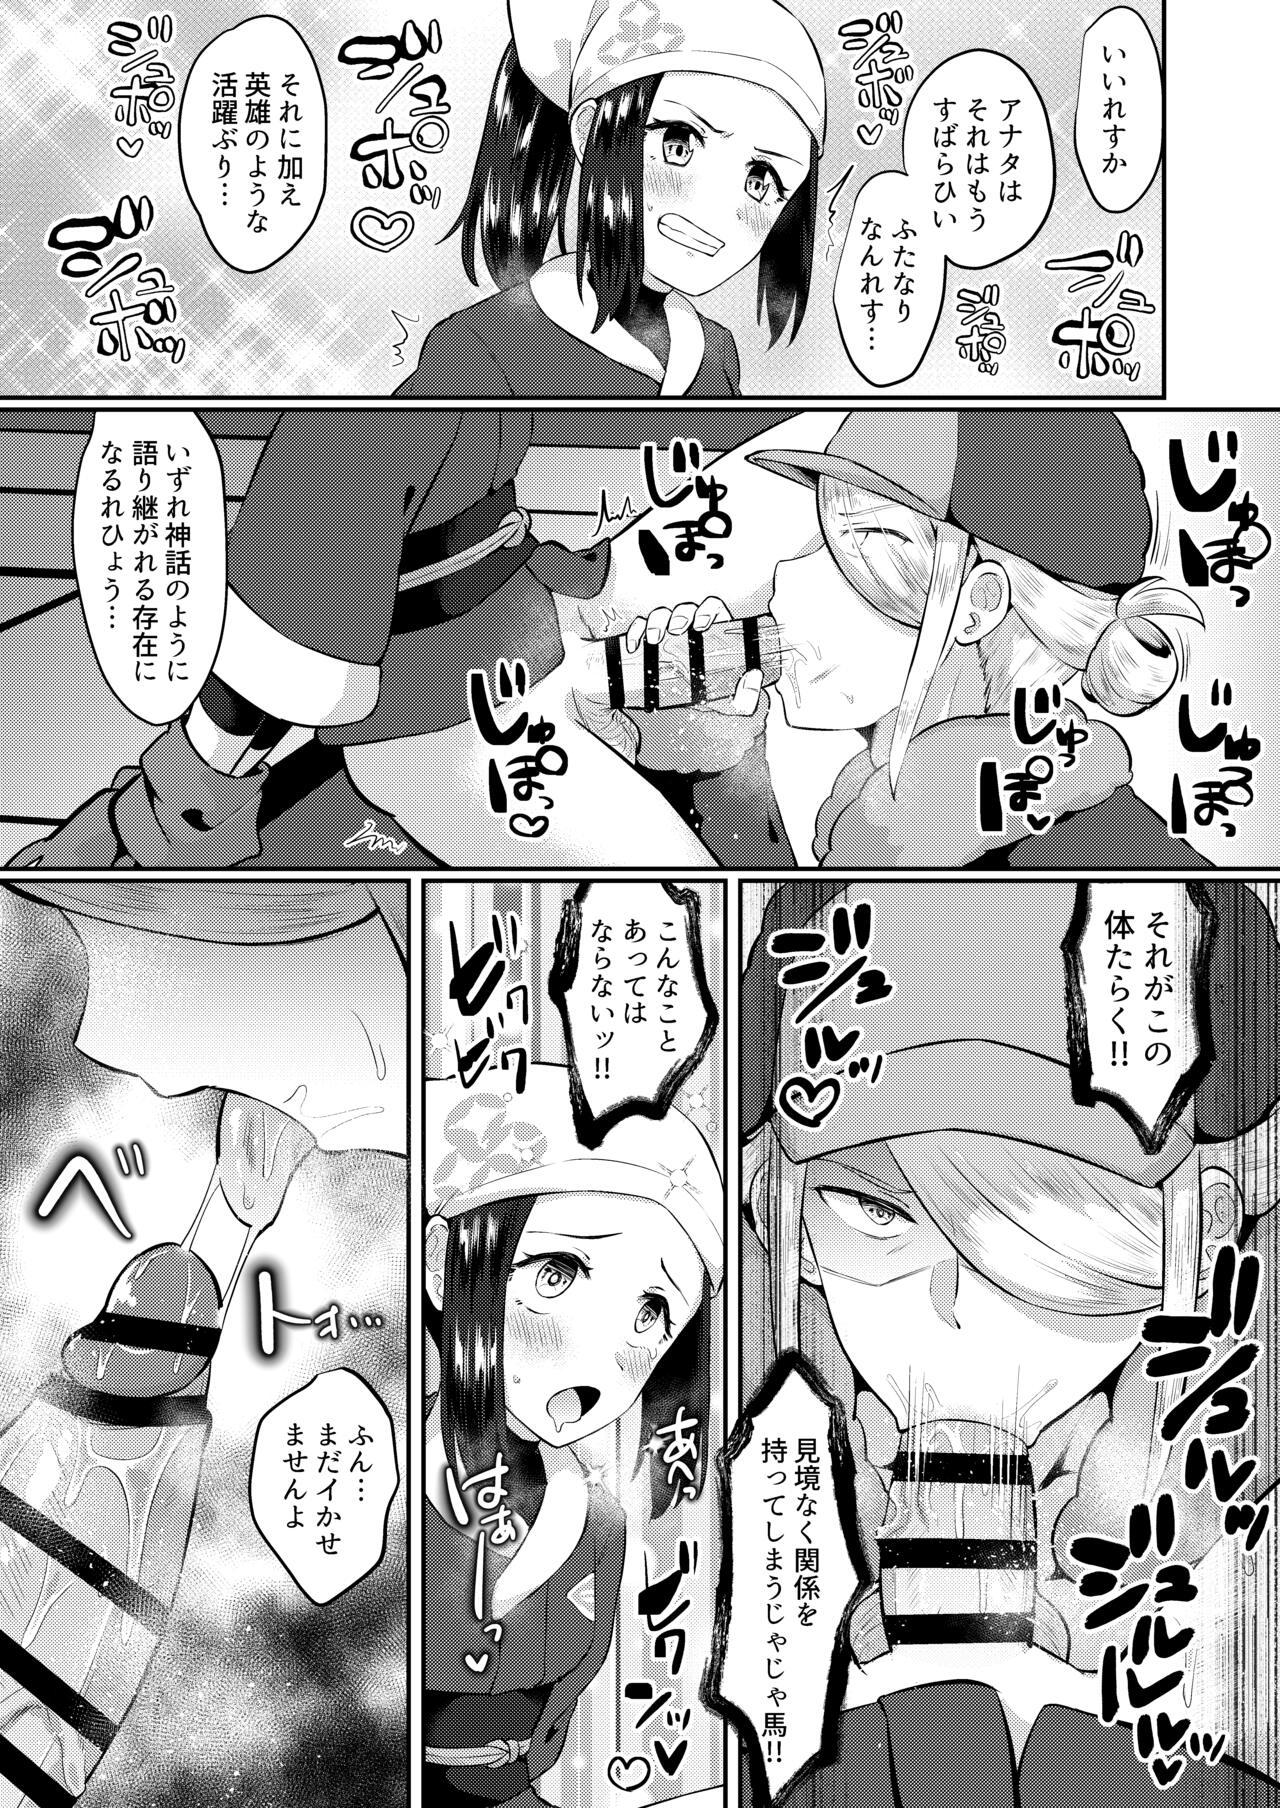 Cowgirl ふたなりに心酔しています… - Pokemon | pocket monsters Indian - Page 3